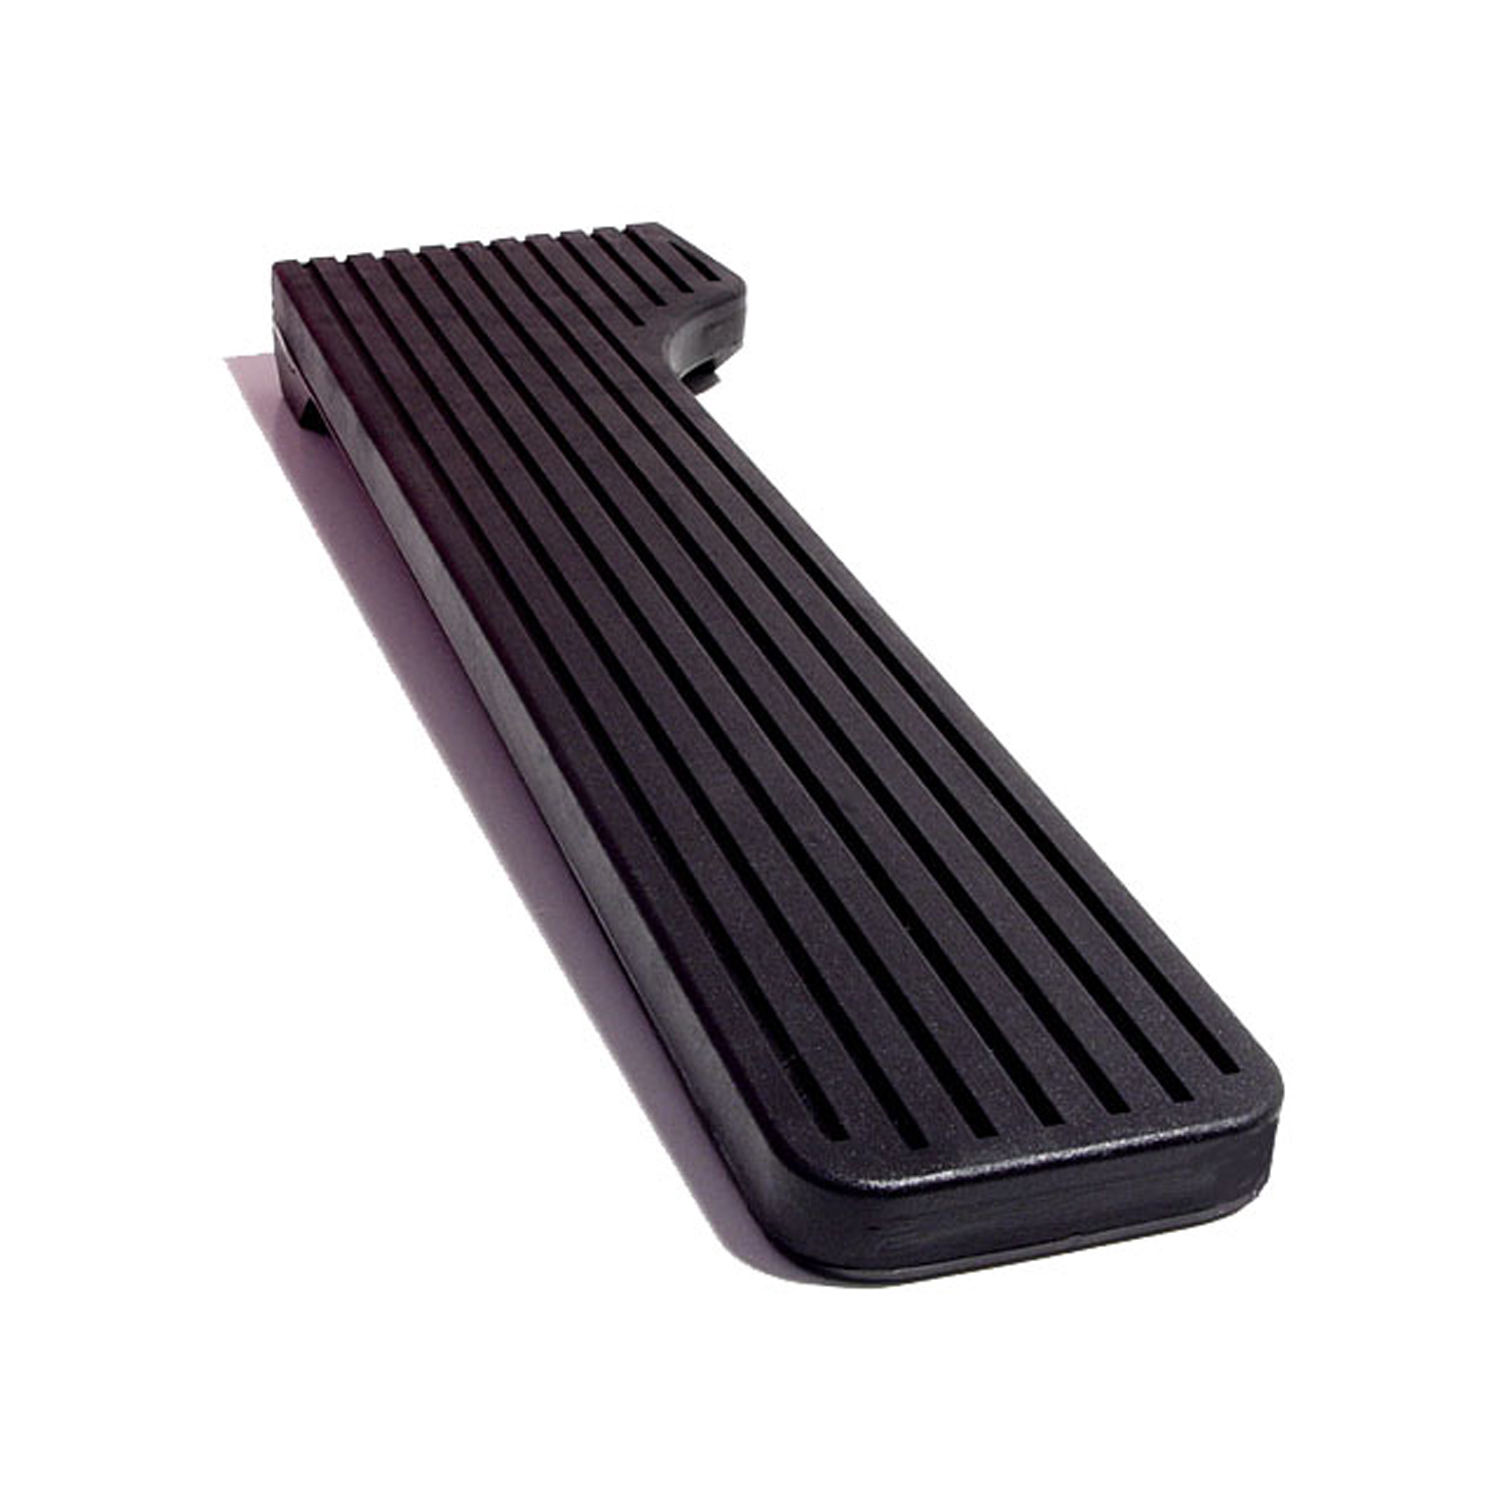 1970 Chevrolet Brookwood Accelerator Pedal Pad without flange-AP 31-B